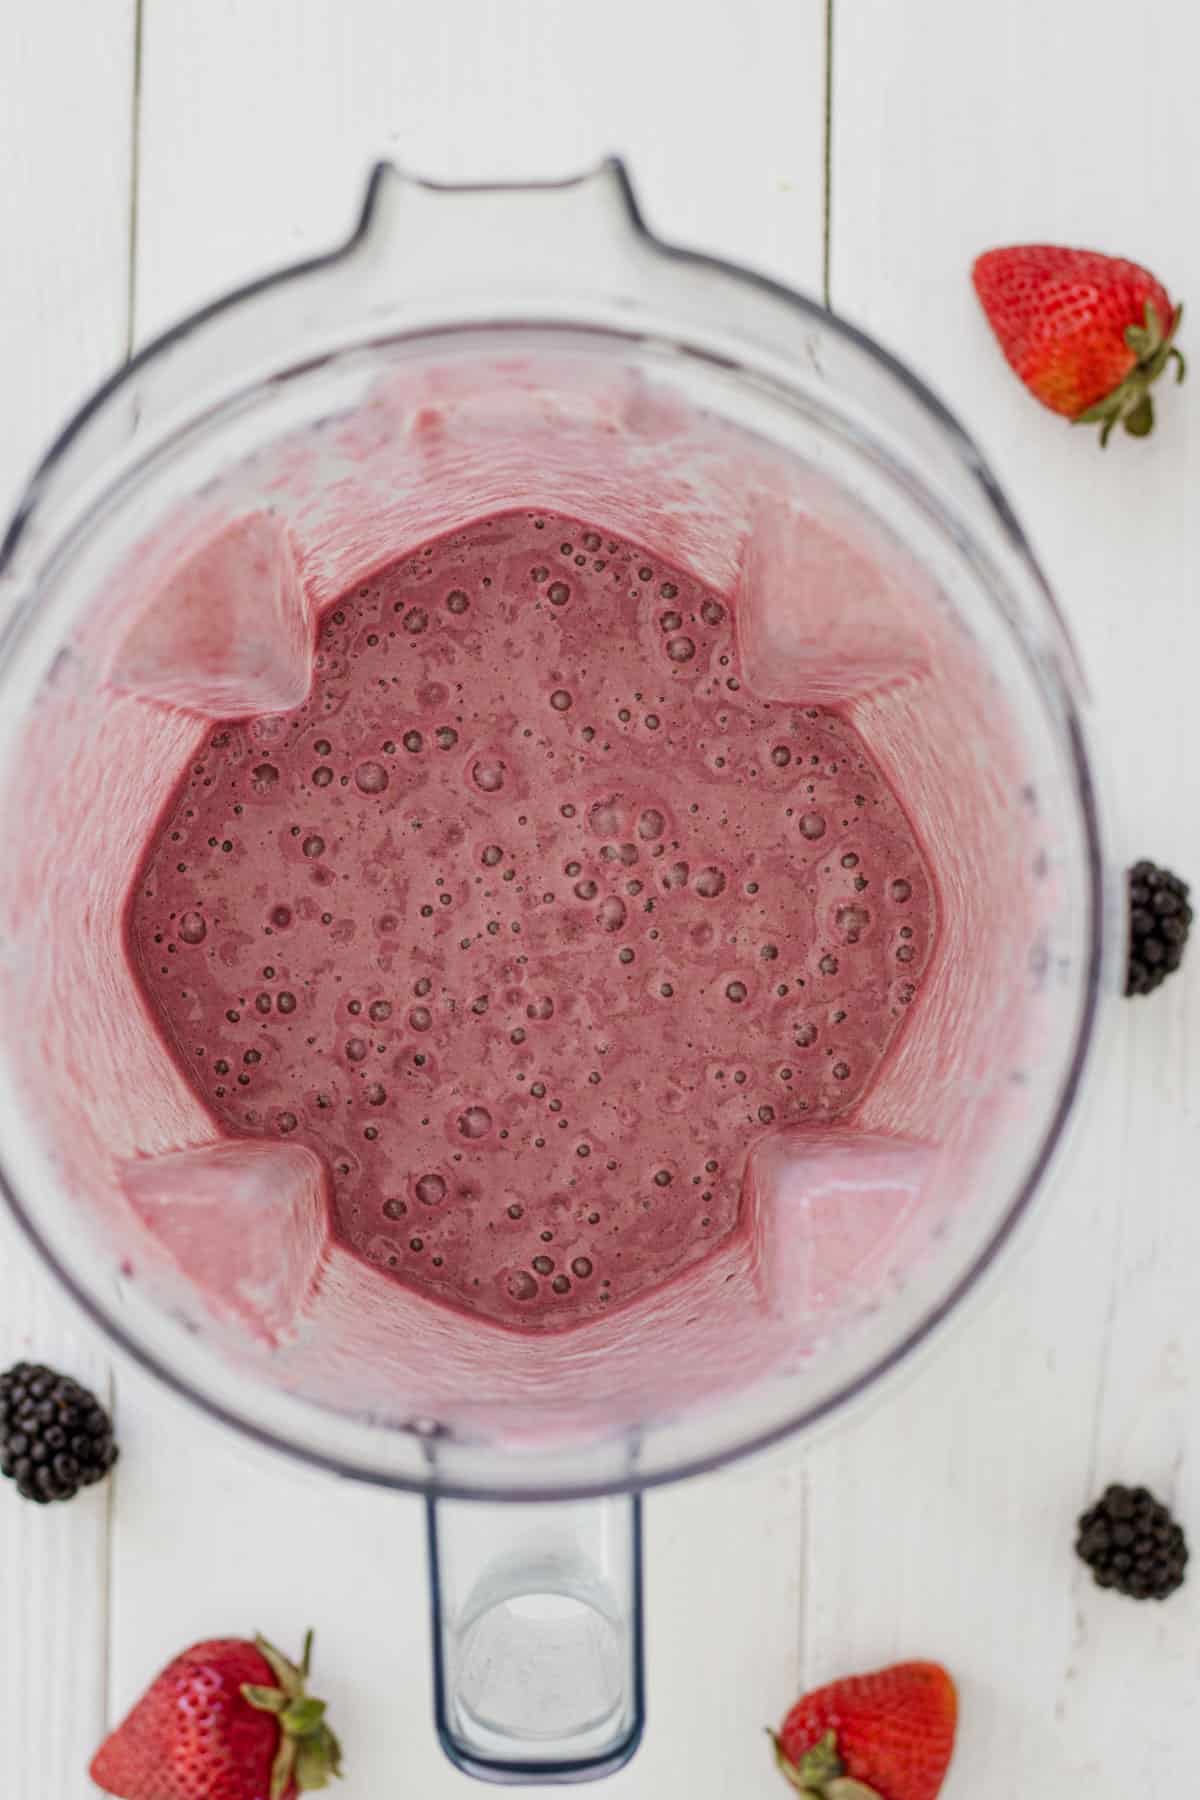 Blended blackberry, strawberry, and banana smoothie.